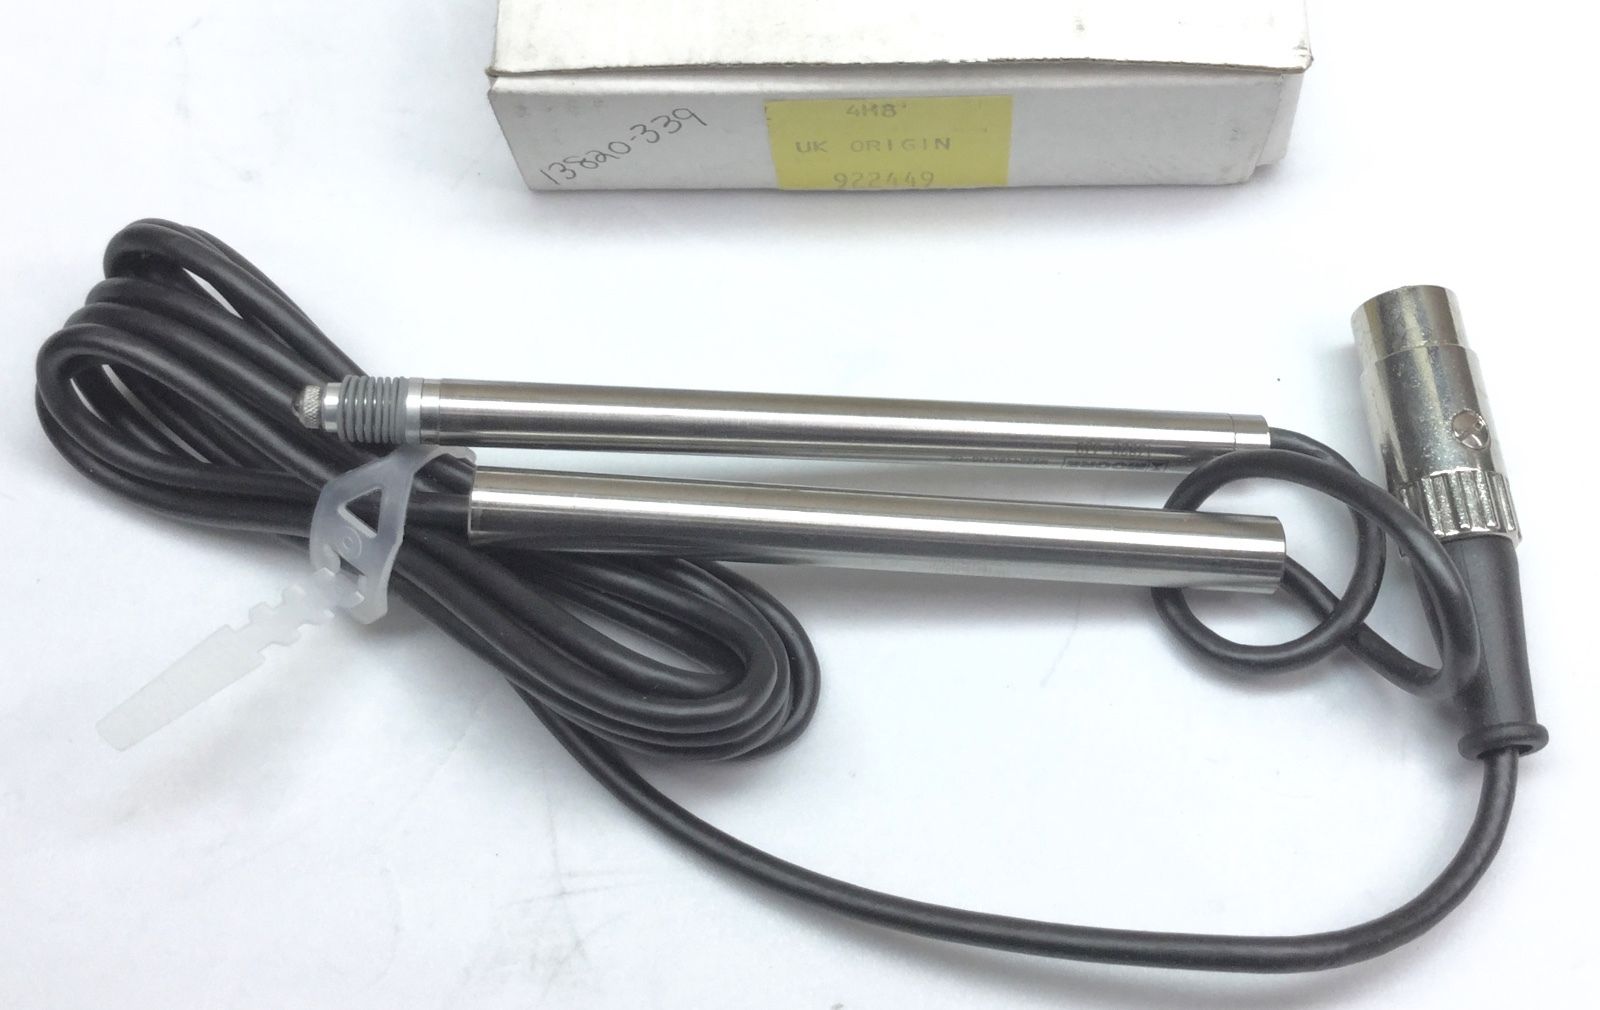 SIEMENS MOORE 13820-339 LINEAR TRANSDUCER PROBE 5 PIN CONNECTOR NEW IN BOX DIAGNOSTIC ULTRASOUND MACHINES FOR SALE